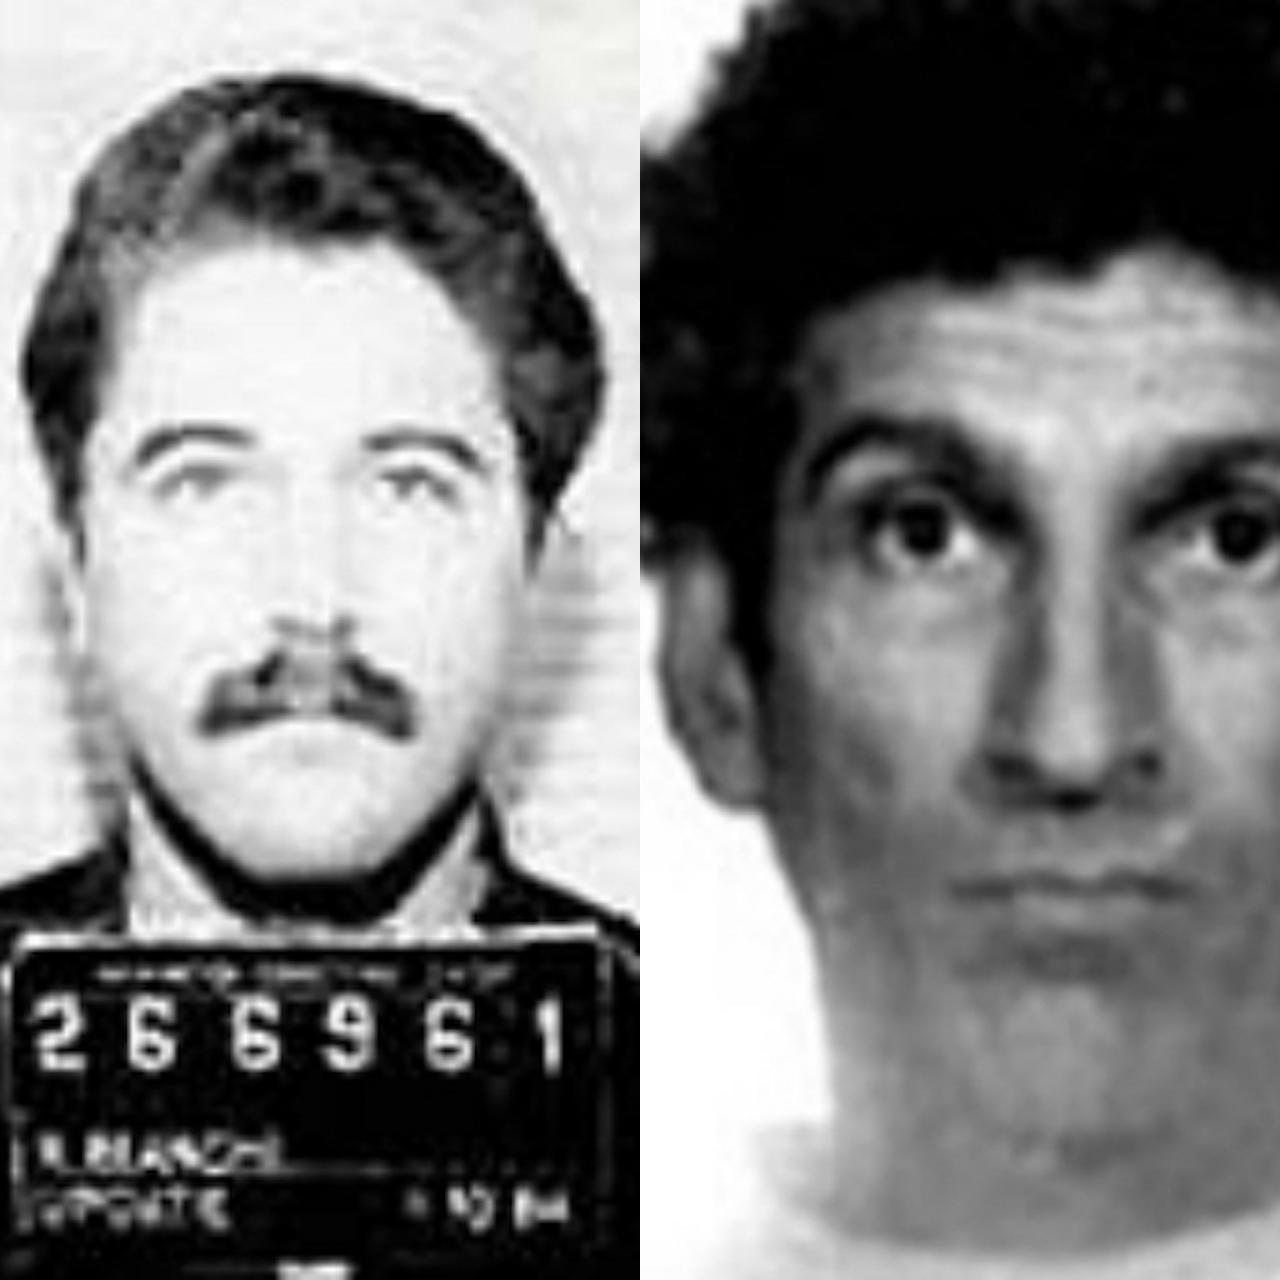 The Hillside Stranglers Were Cousins Who Killed Together Crime History Investigation Discovery picture